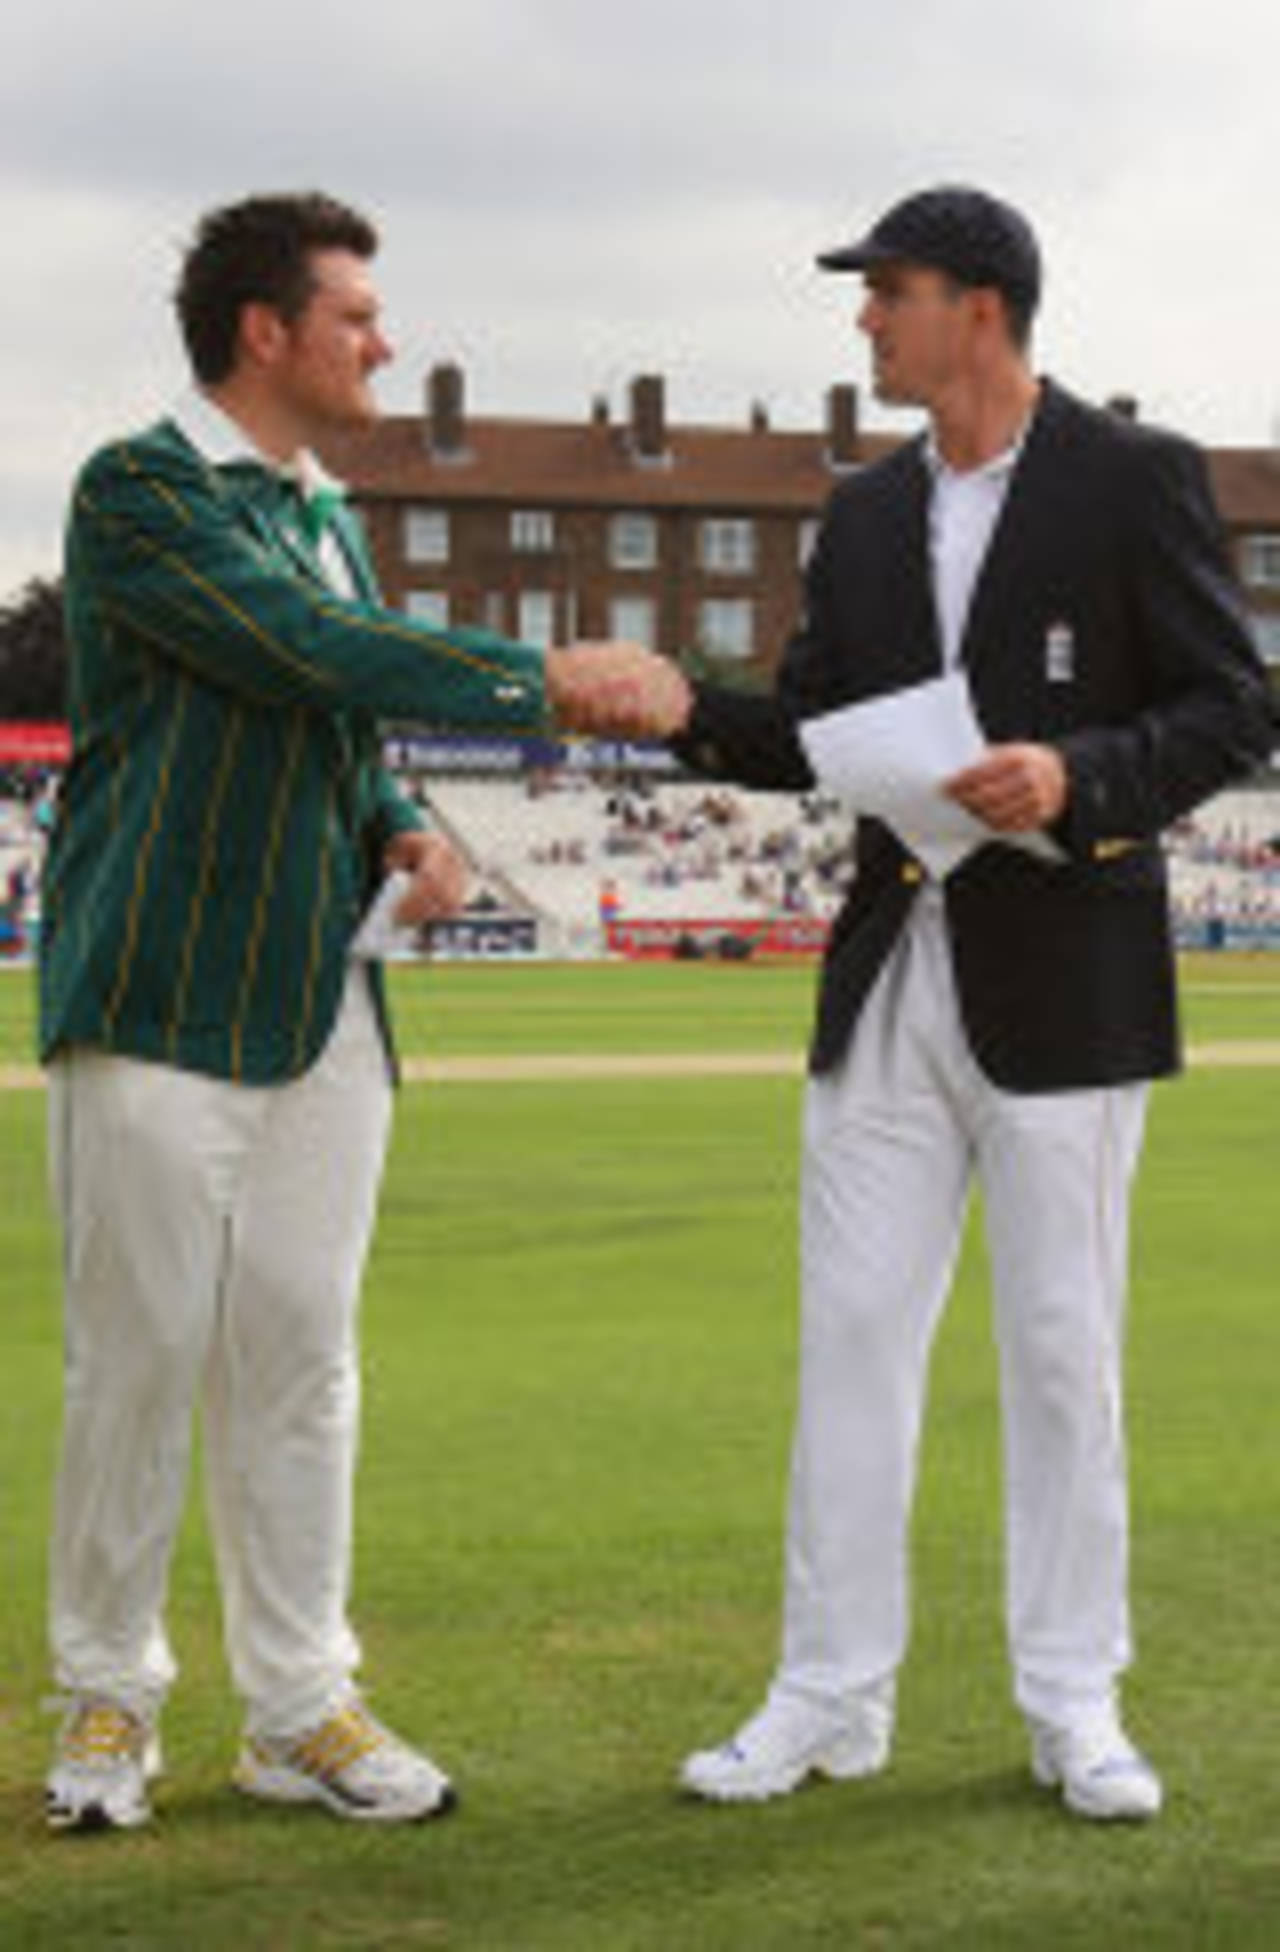 Graeme Smith and Kevin Pietersen shake hands at the toss, England v South Africa, 4th Test, The Oval, August 7, 2008